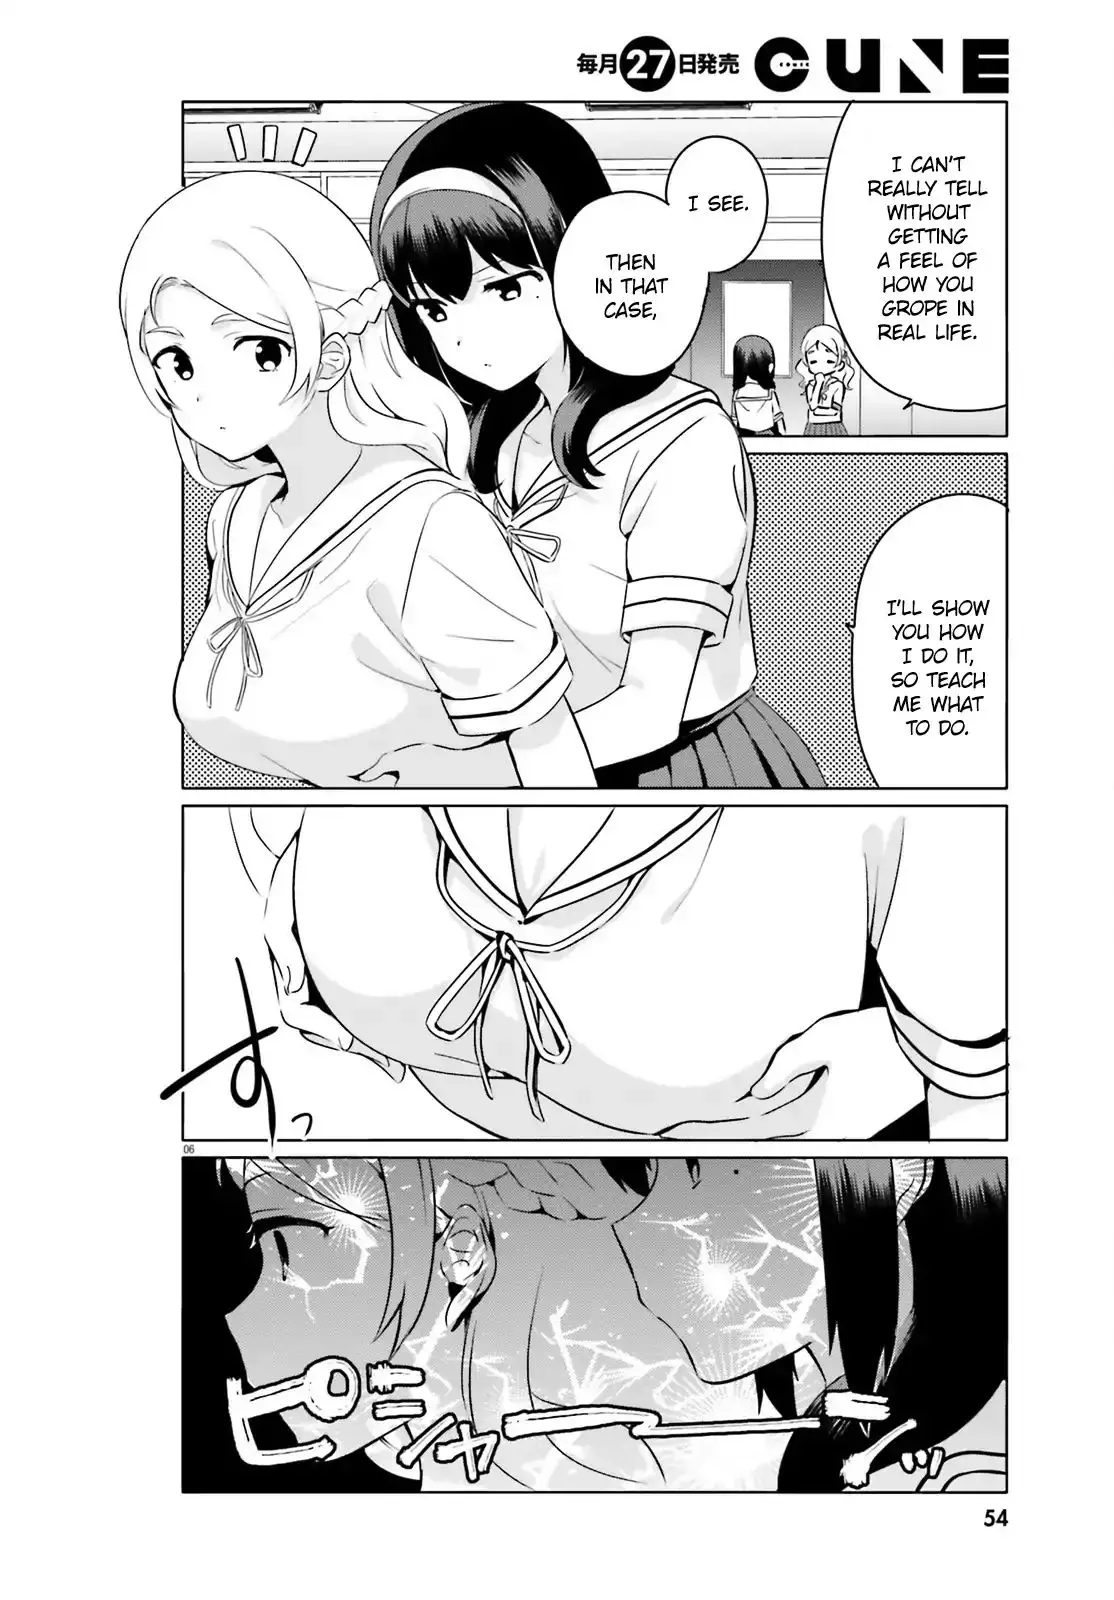 I Like Oppai Best In The World! - 23 page 6